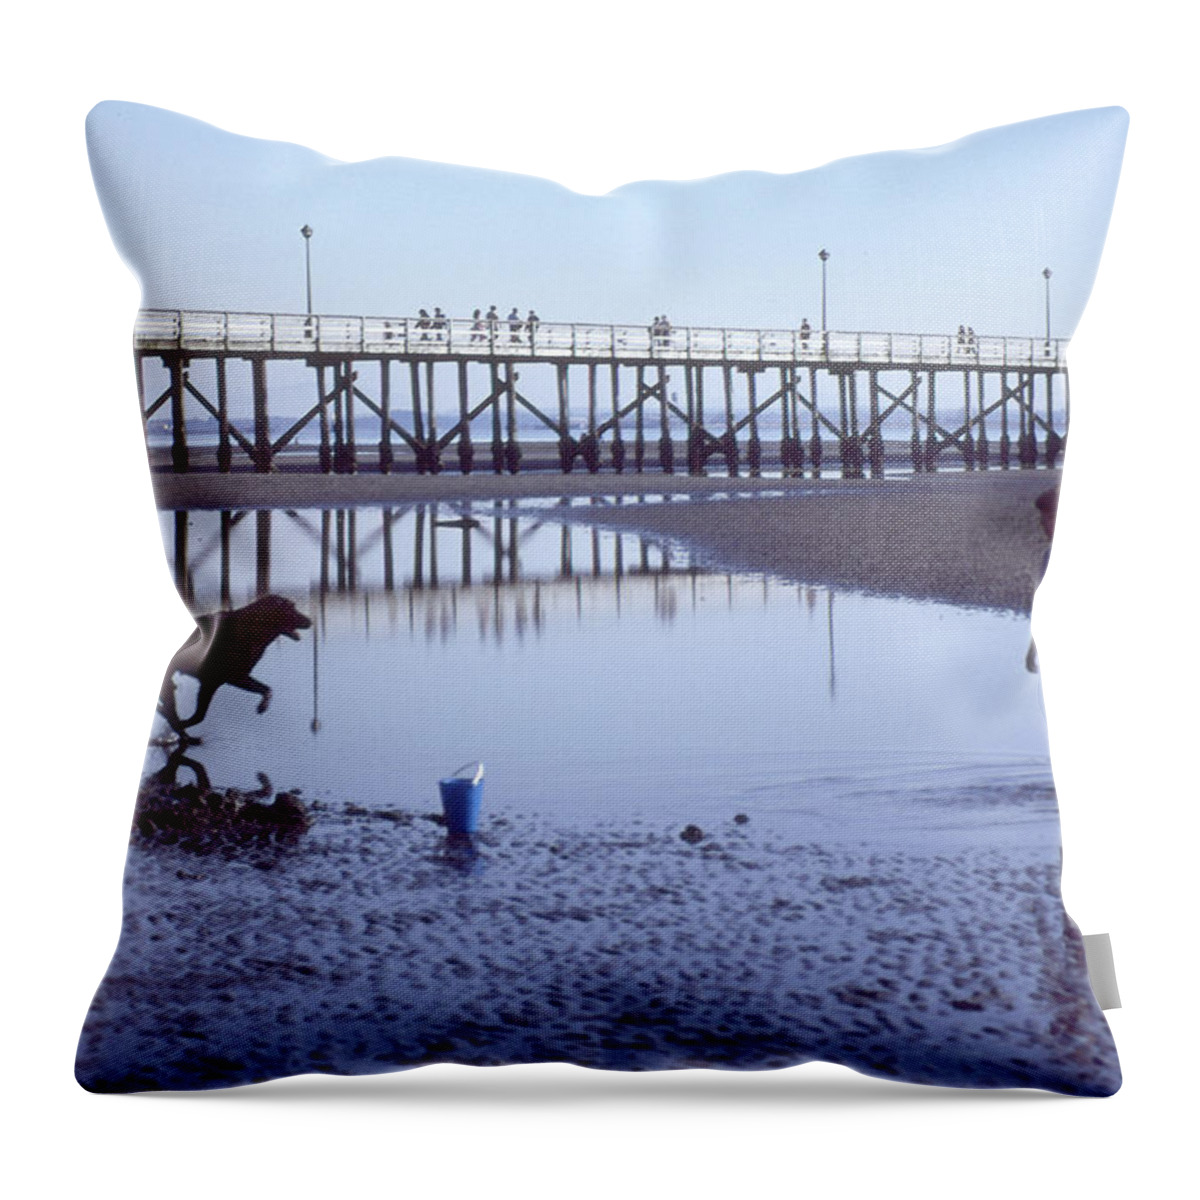 Abstract Throw Pillow featuring the digital art Boy And Dog On The Beach by Lyle Crump